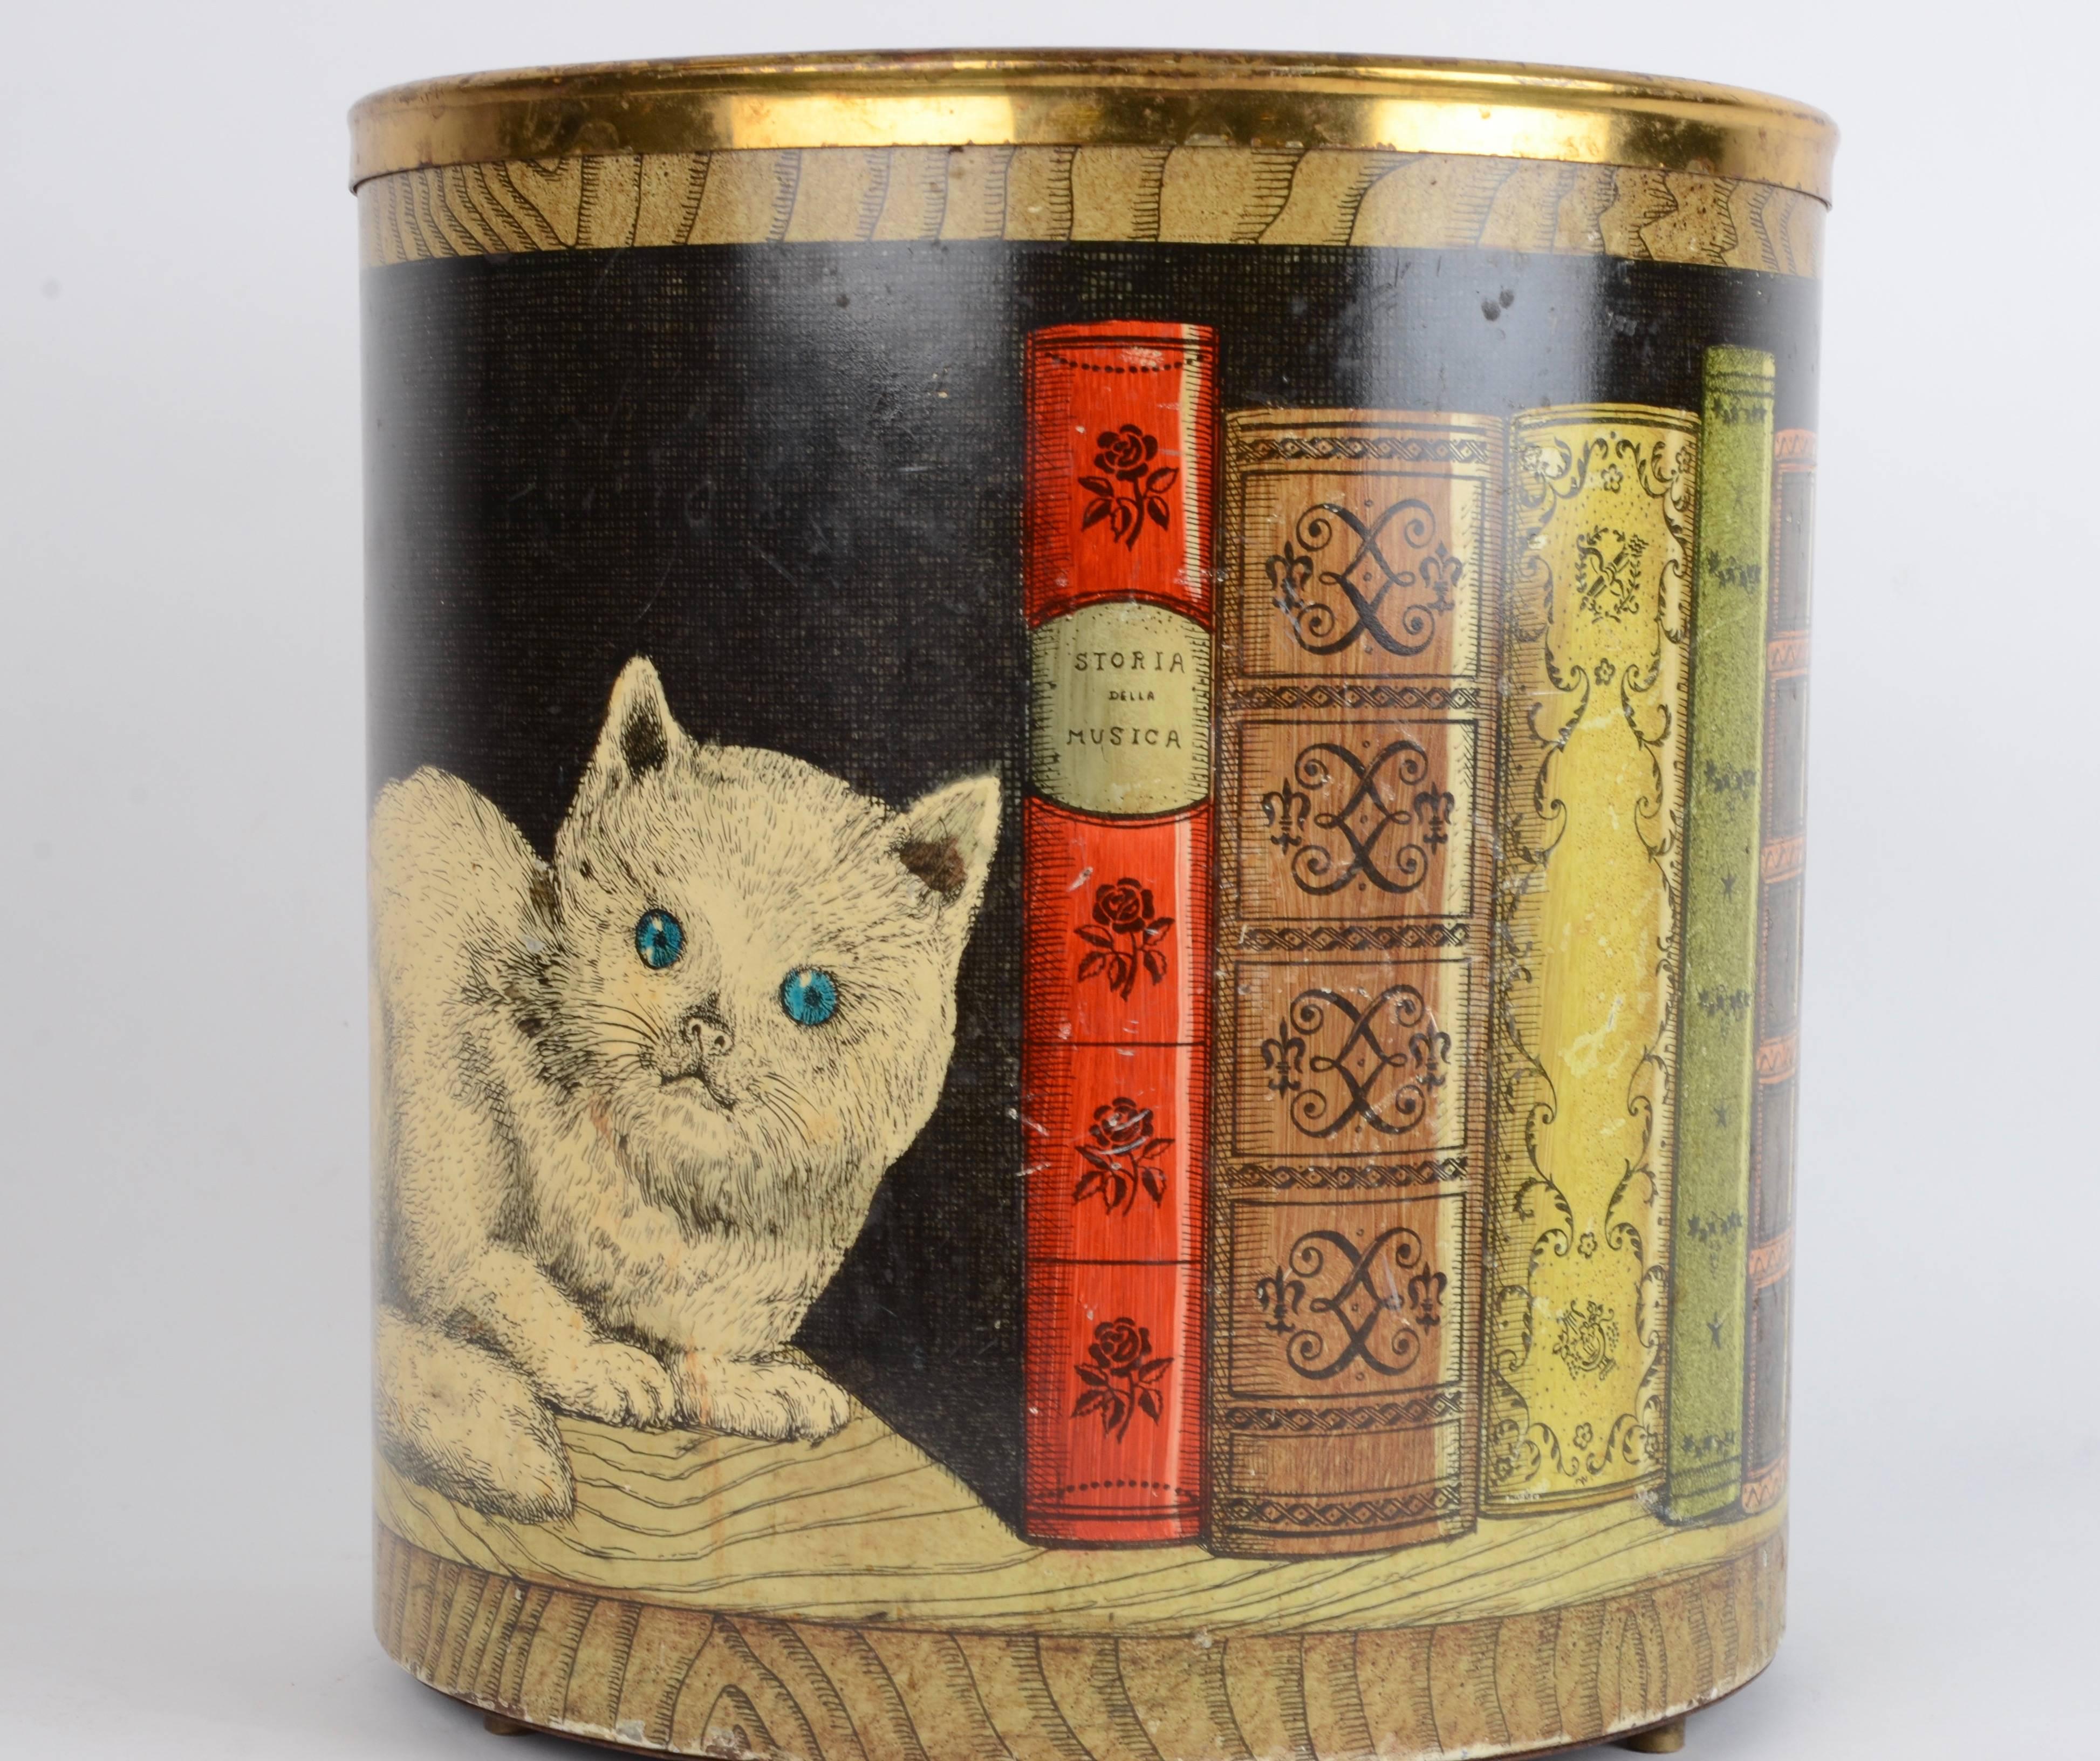 Waste paper bin with motif of cat and books, designed by Piero Fornasetti, mid-1900s.